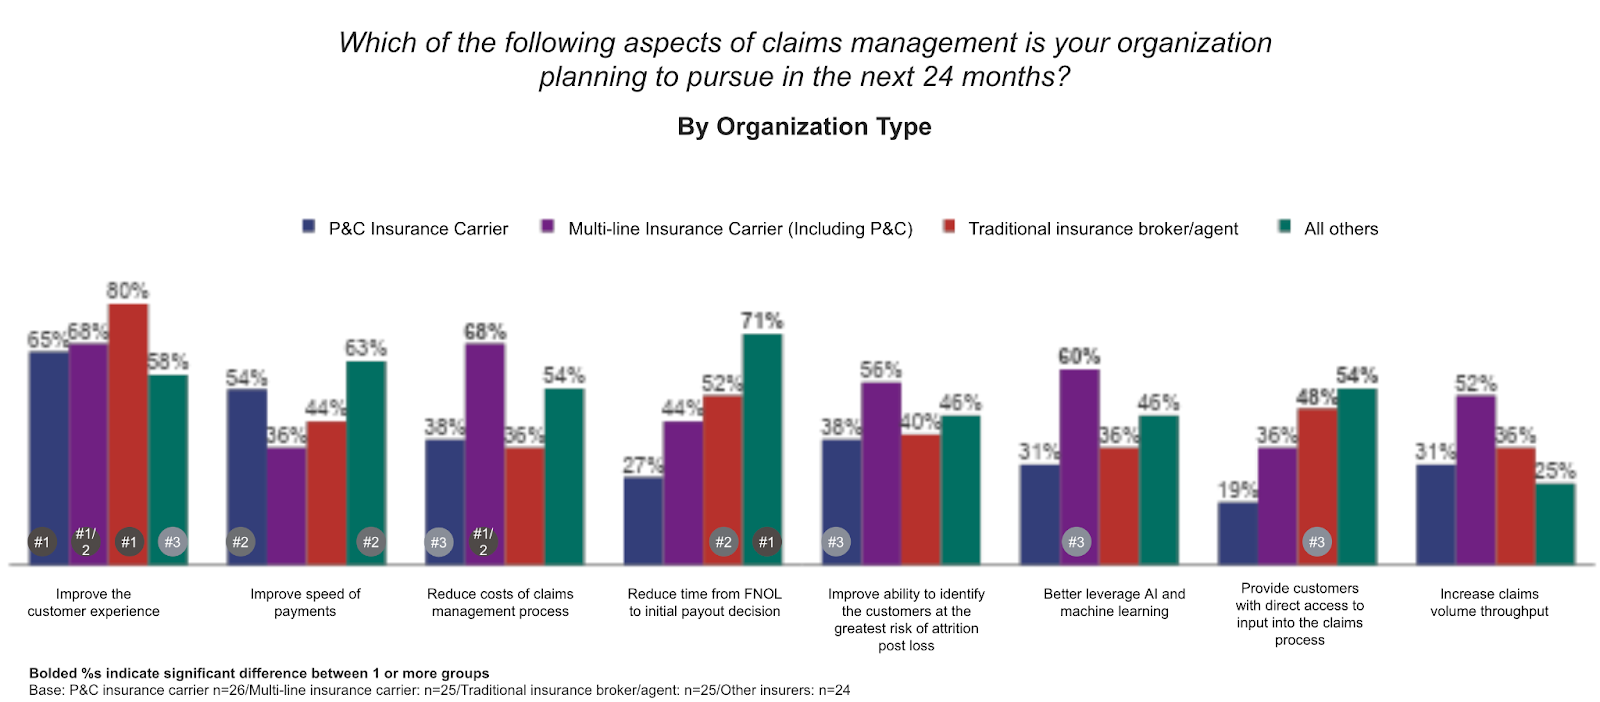 Graph of responses to question, Which of the following aspects of claims management is your organization planning to pursue in the next 24 months by organization type.